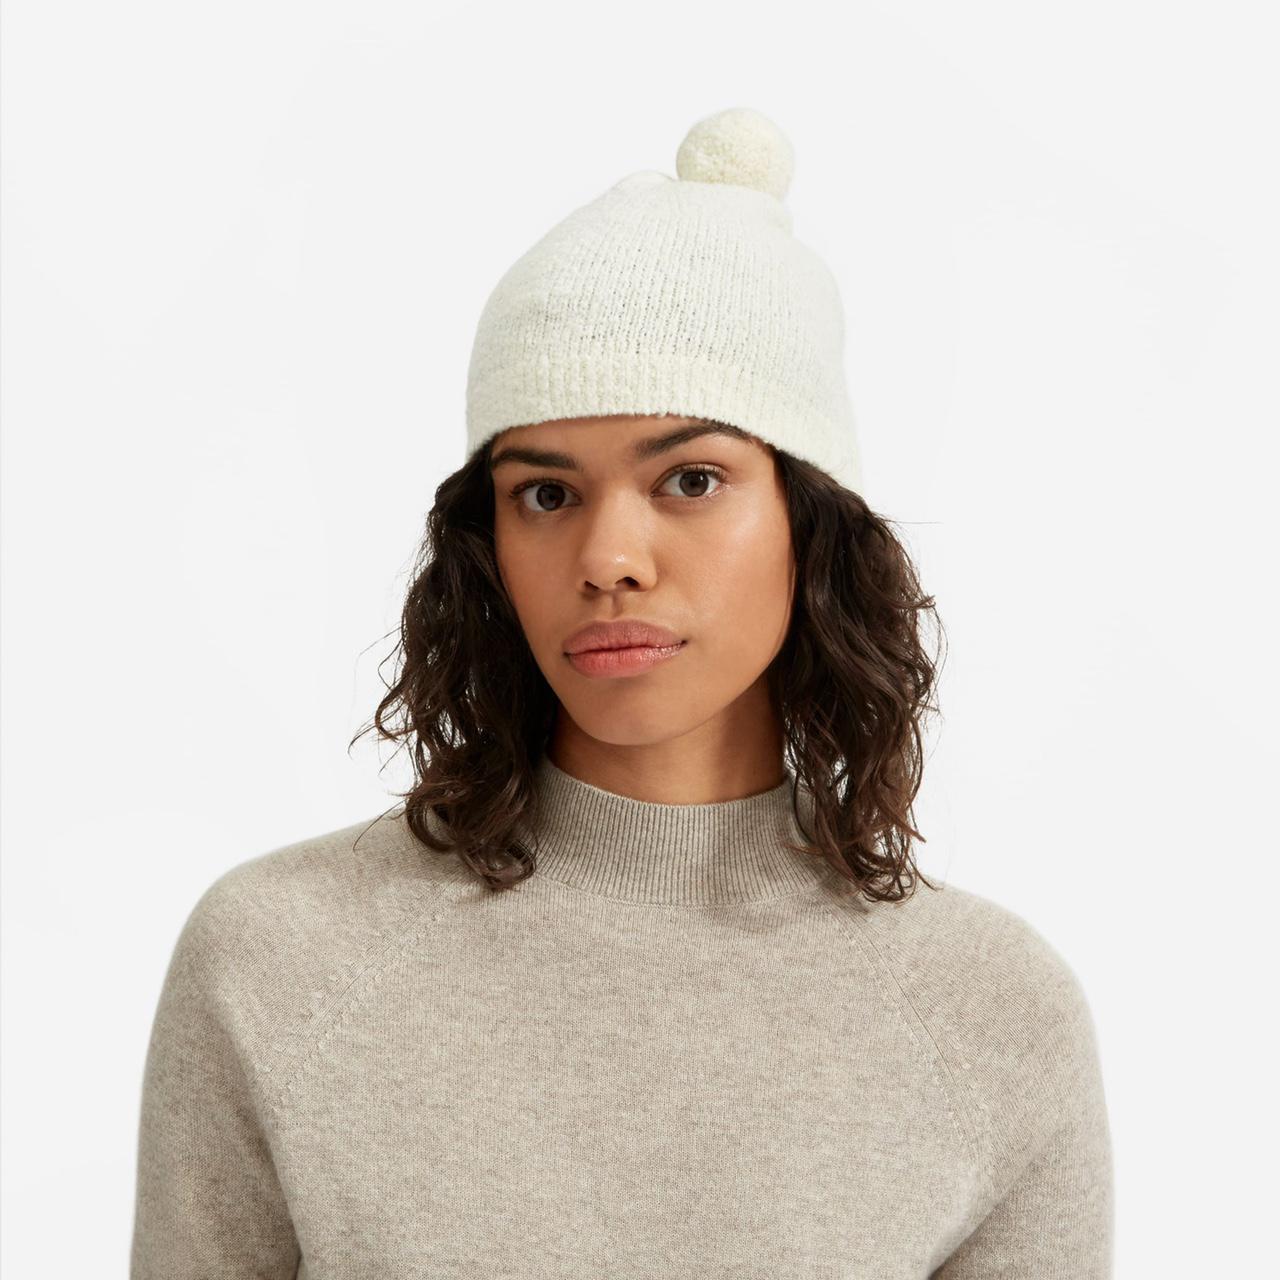 Product Image 4 - Everlane The Teddy Beanie
O/S
Excellent condition